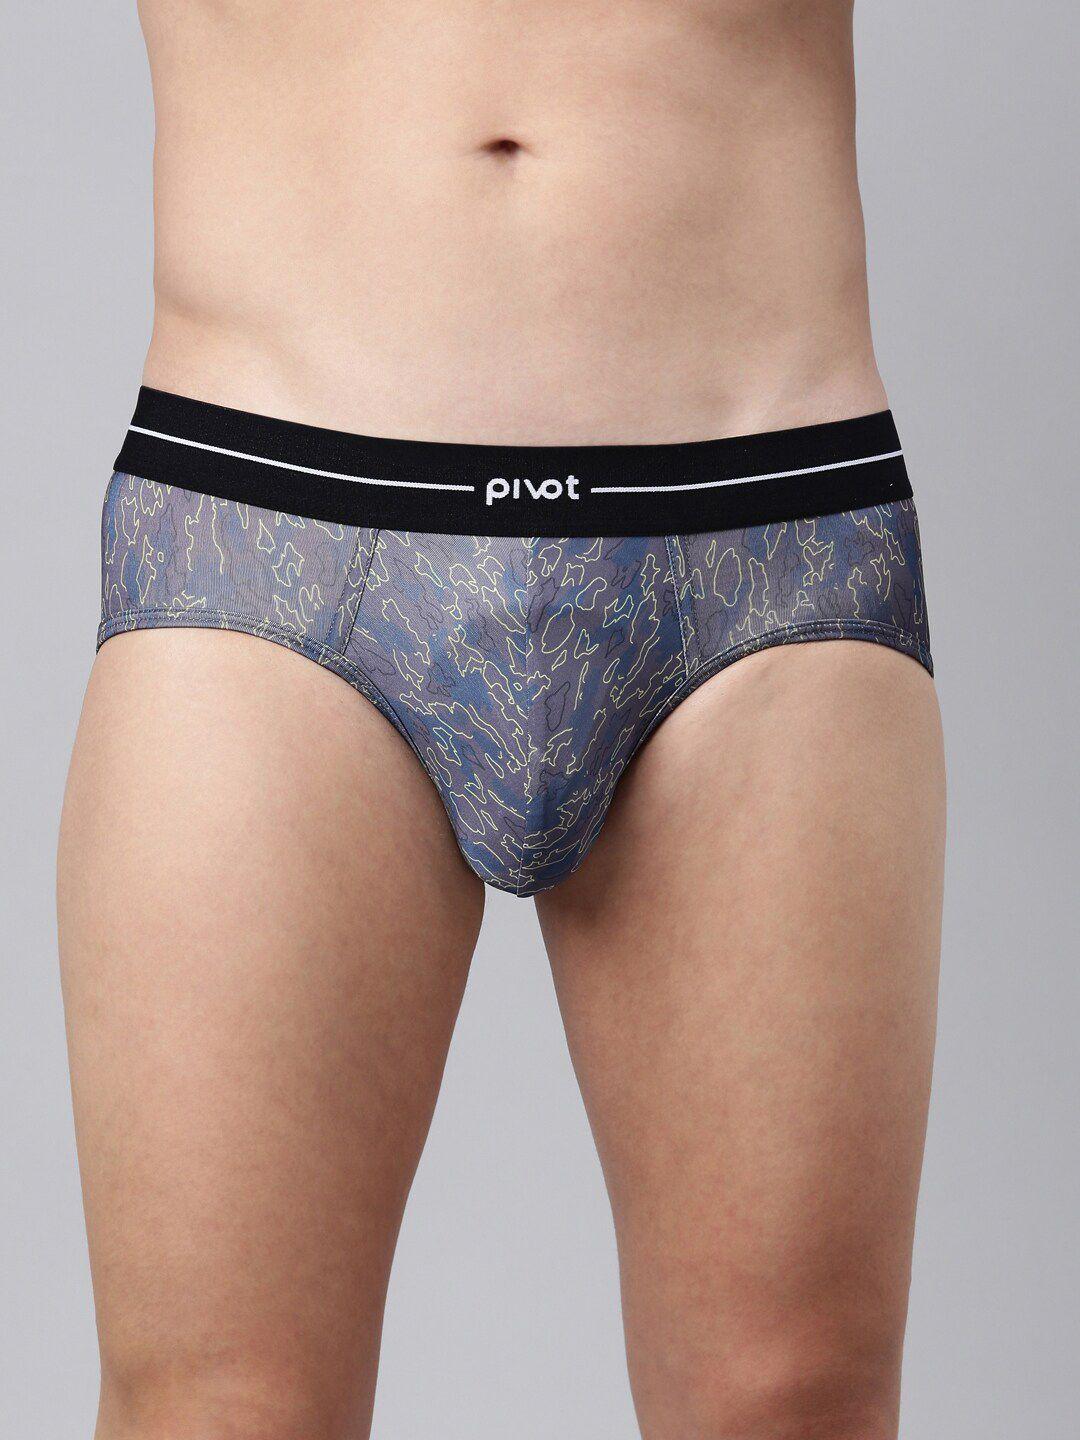 pivot men mid-rise abstract printed basic briefs